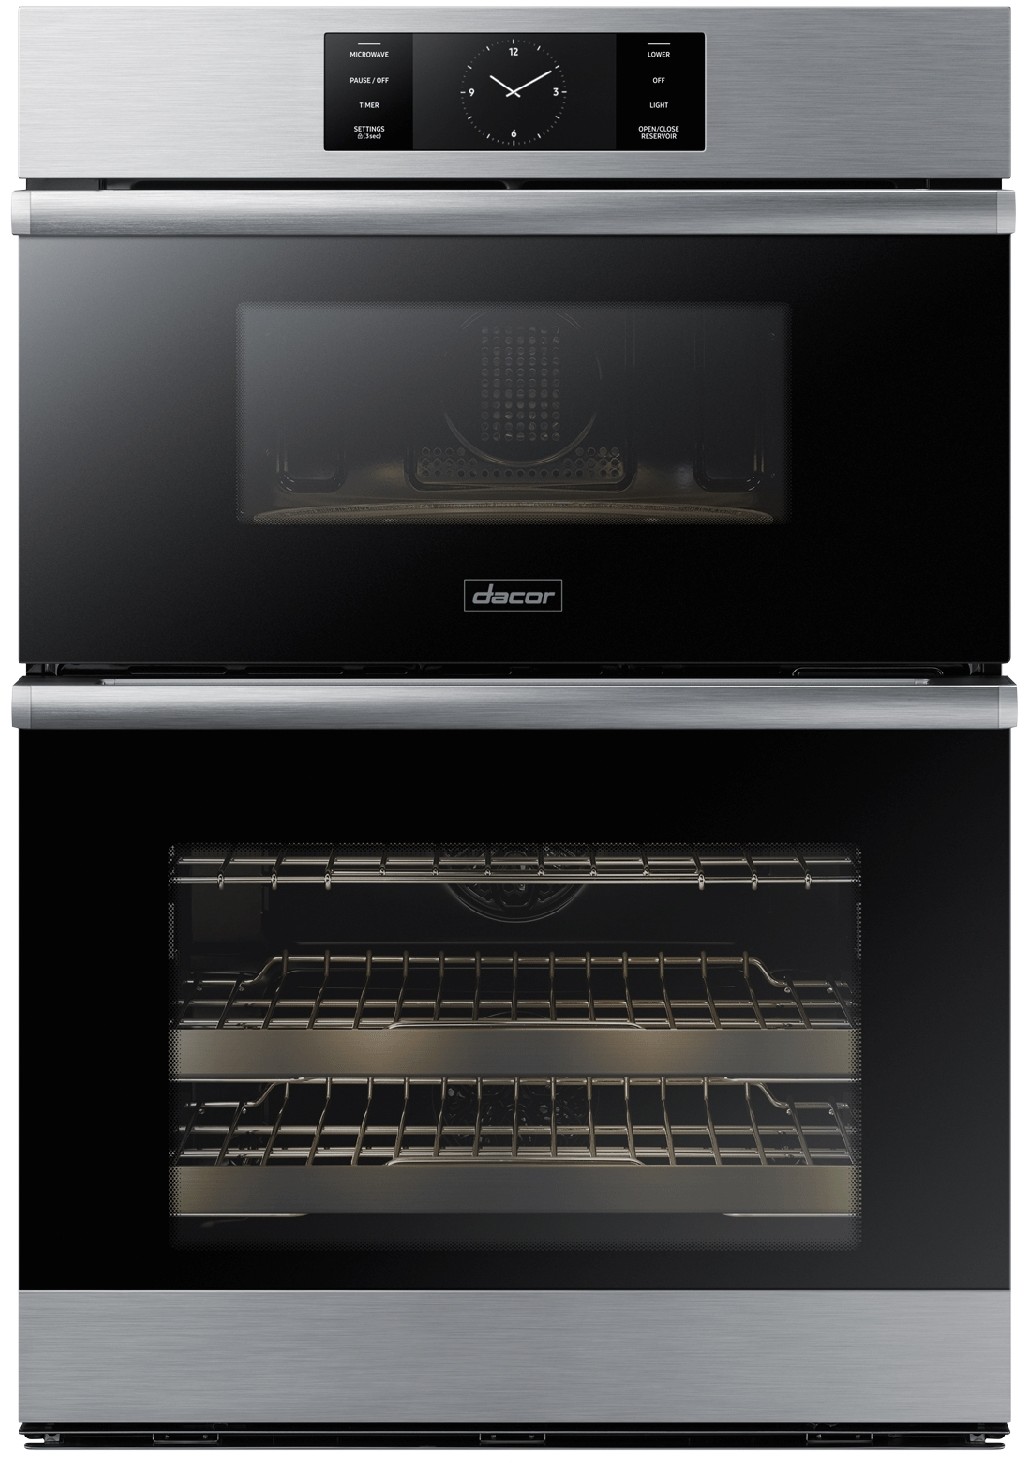 Contemporary 30"" Double Electric Speed Oven - Dacor DOC30M977DS